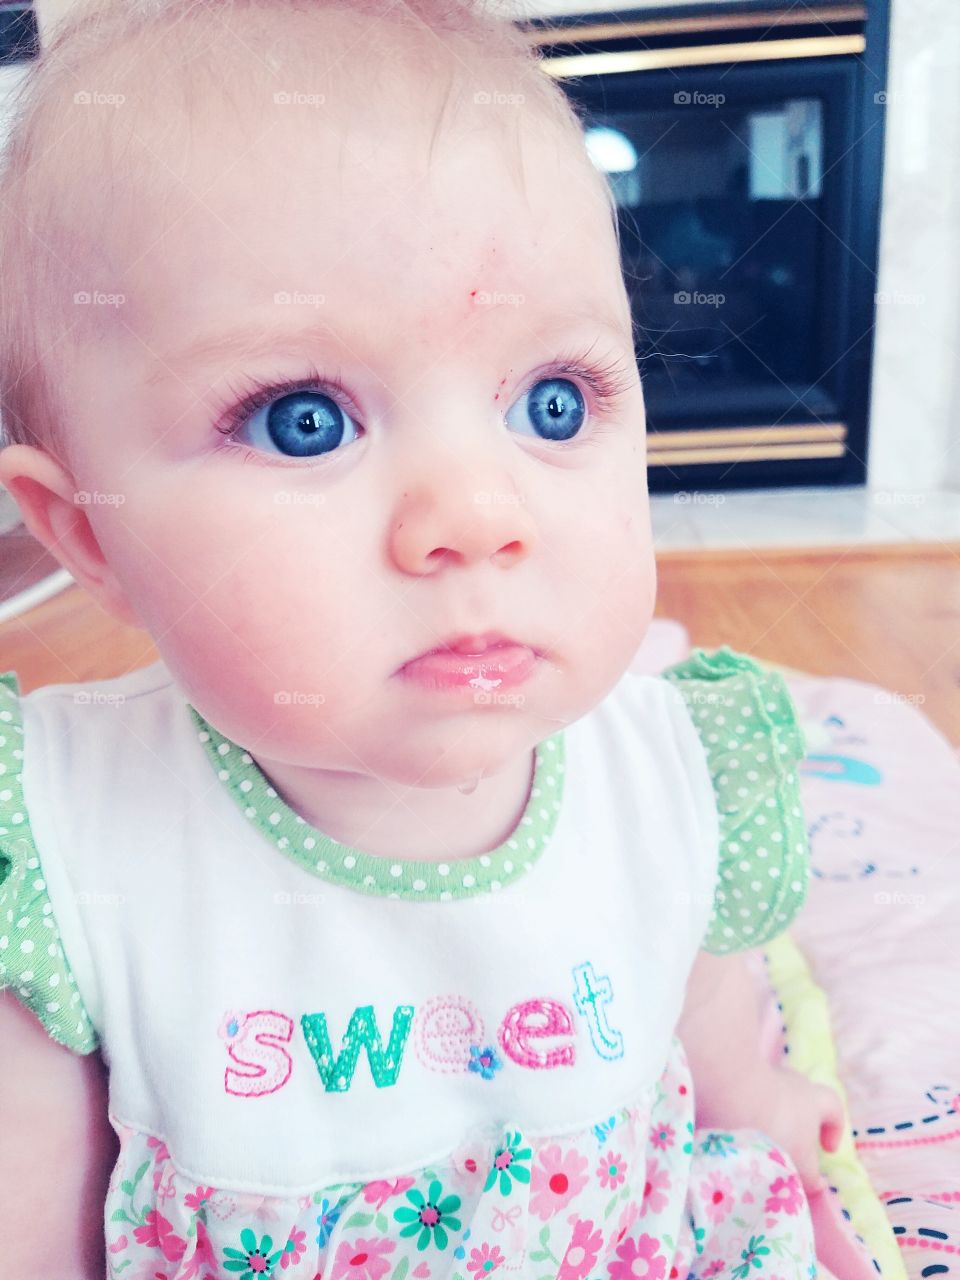 Close-up of a baby with blue eyes